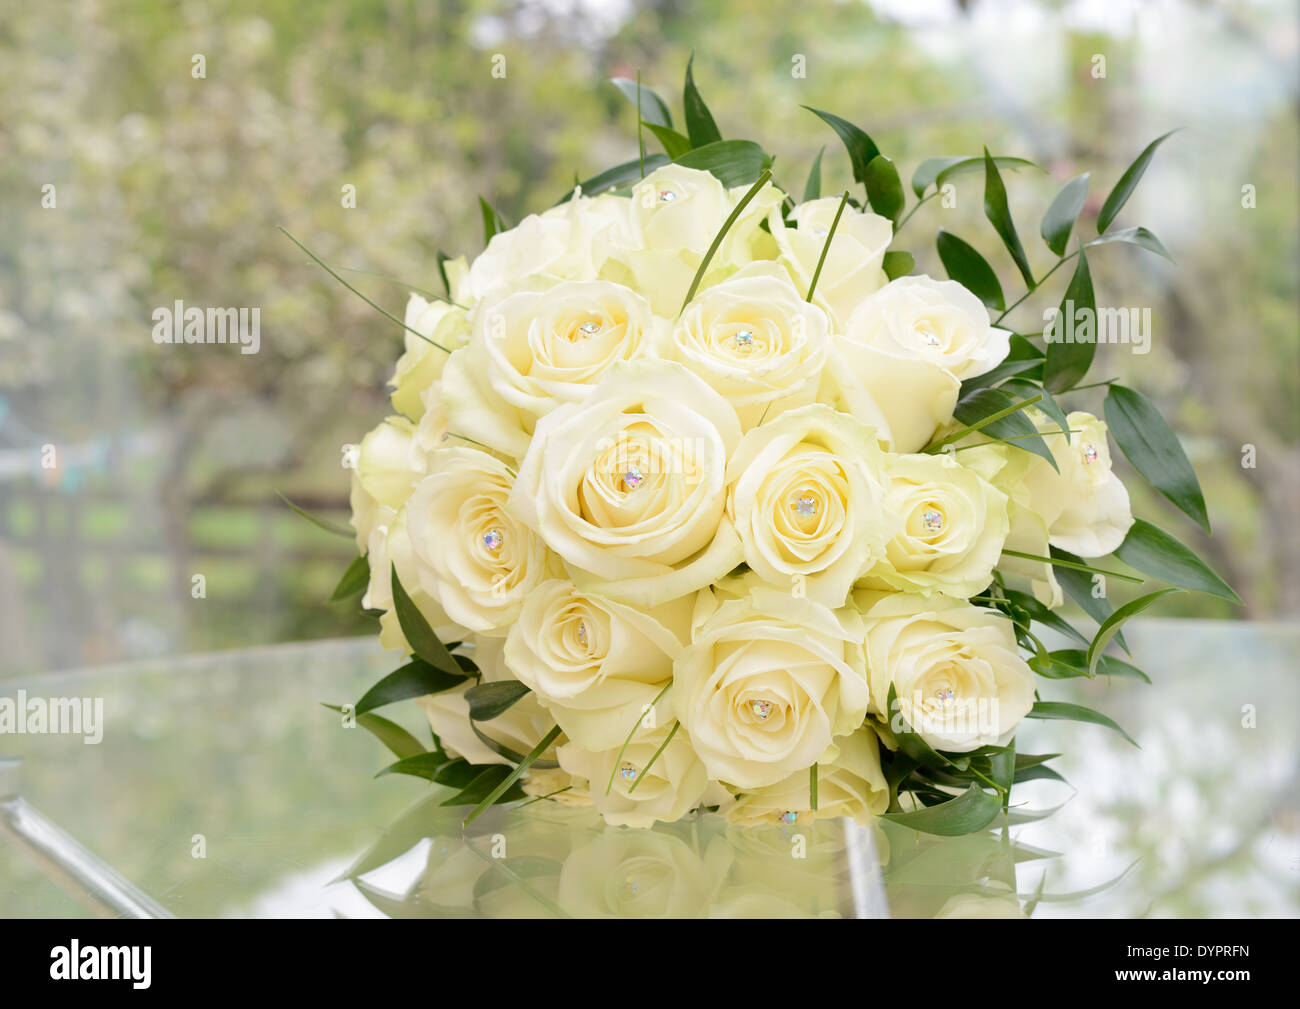 Brides bouquet of beautiful yellow roses on wedding day Stock Photo